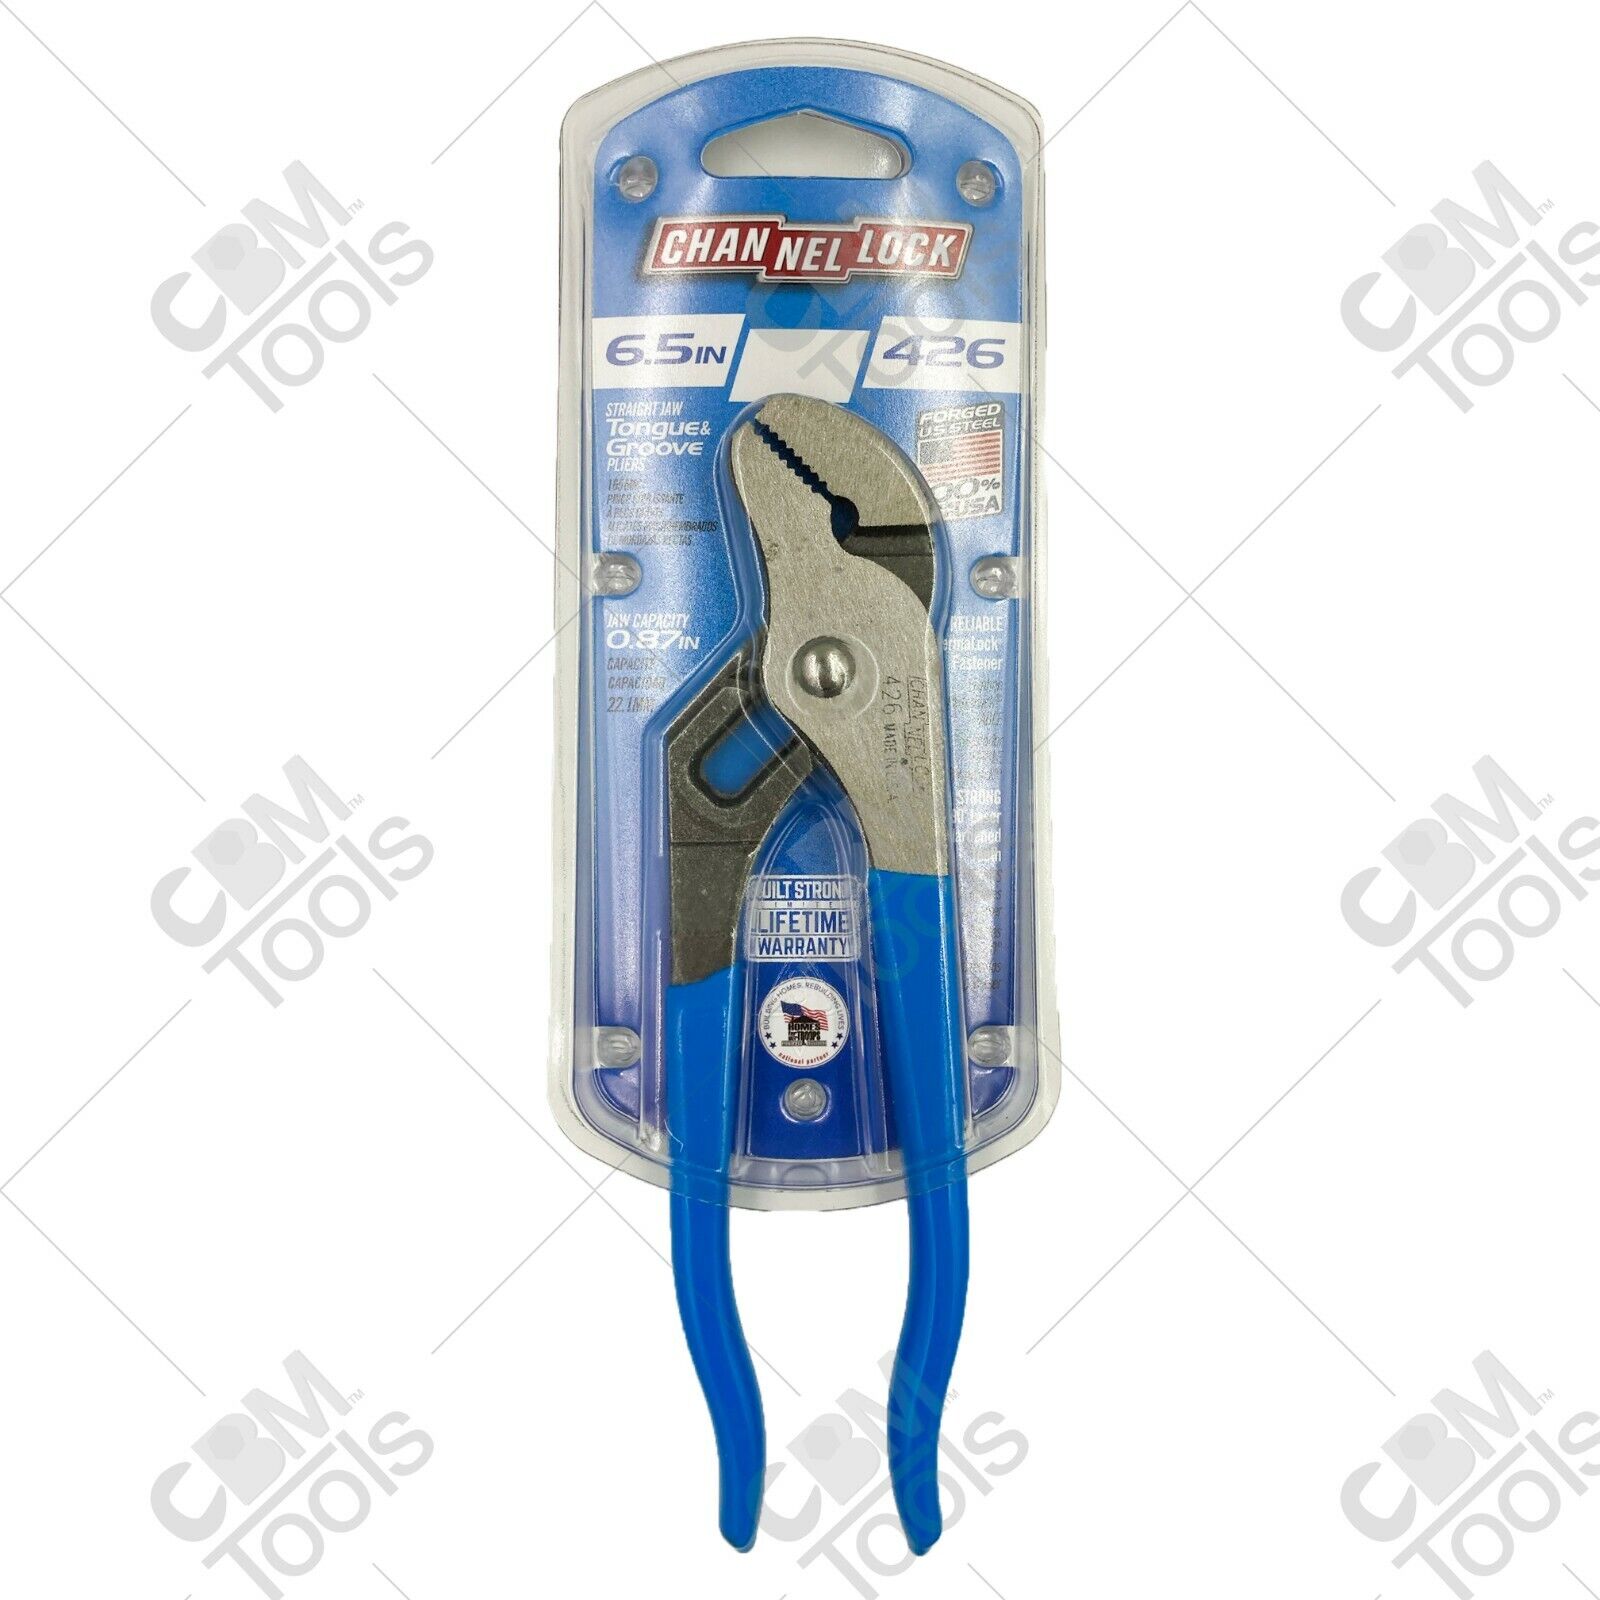 Channellock 426 6.5" Straight Jaw Tongue and Groove Pliers 0.87" Capacity